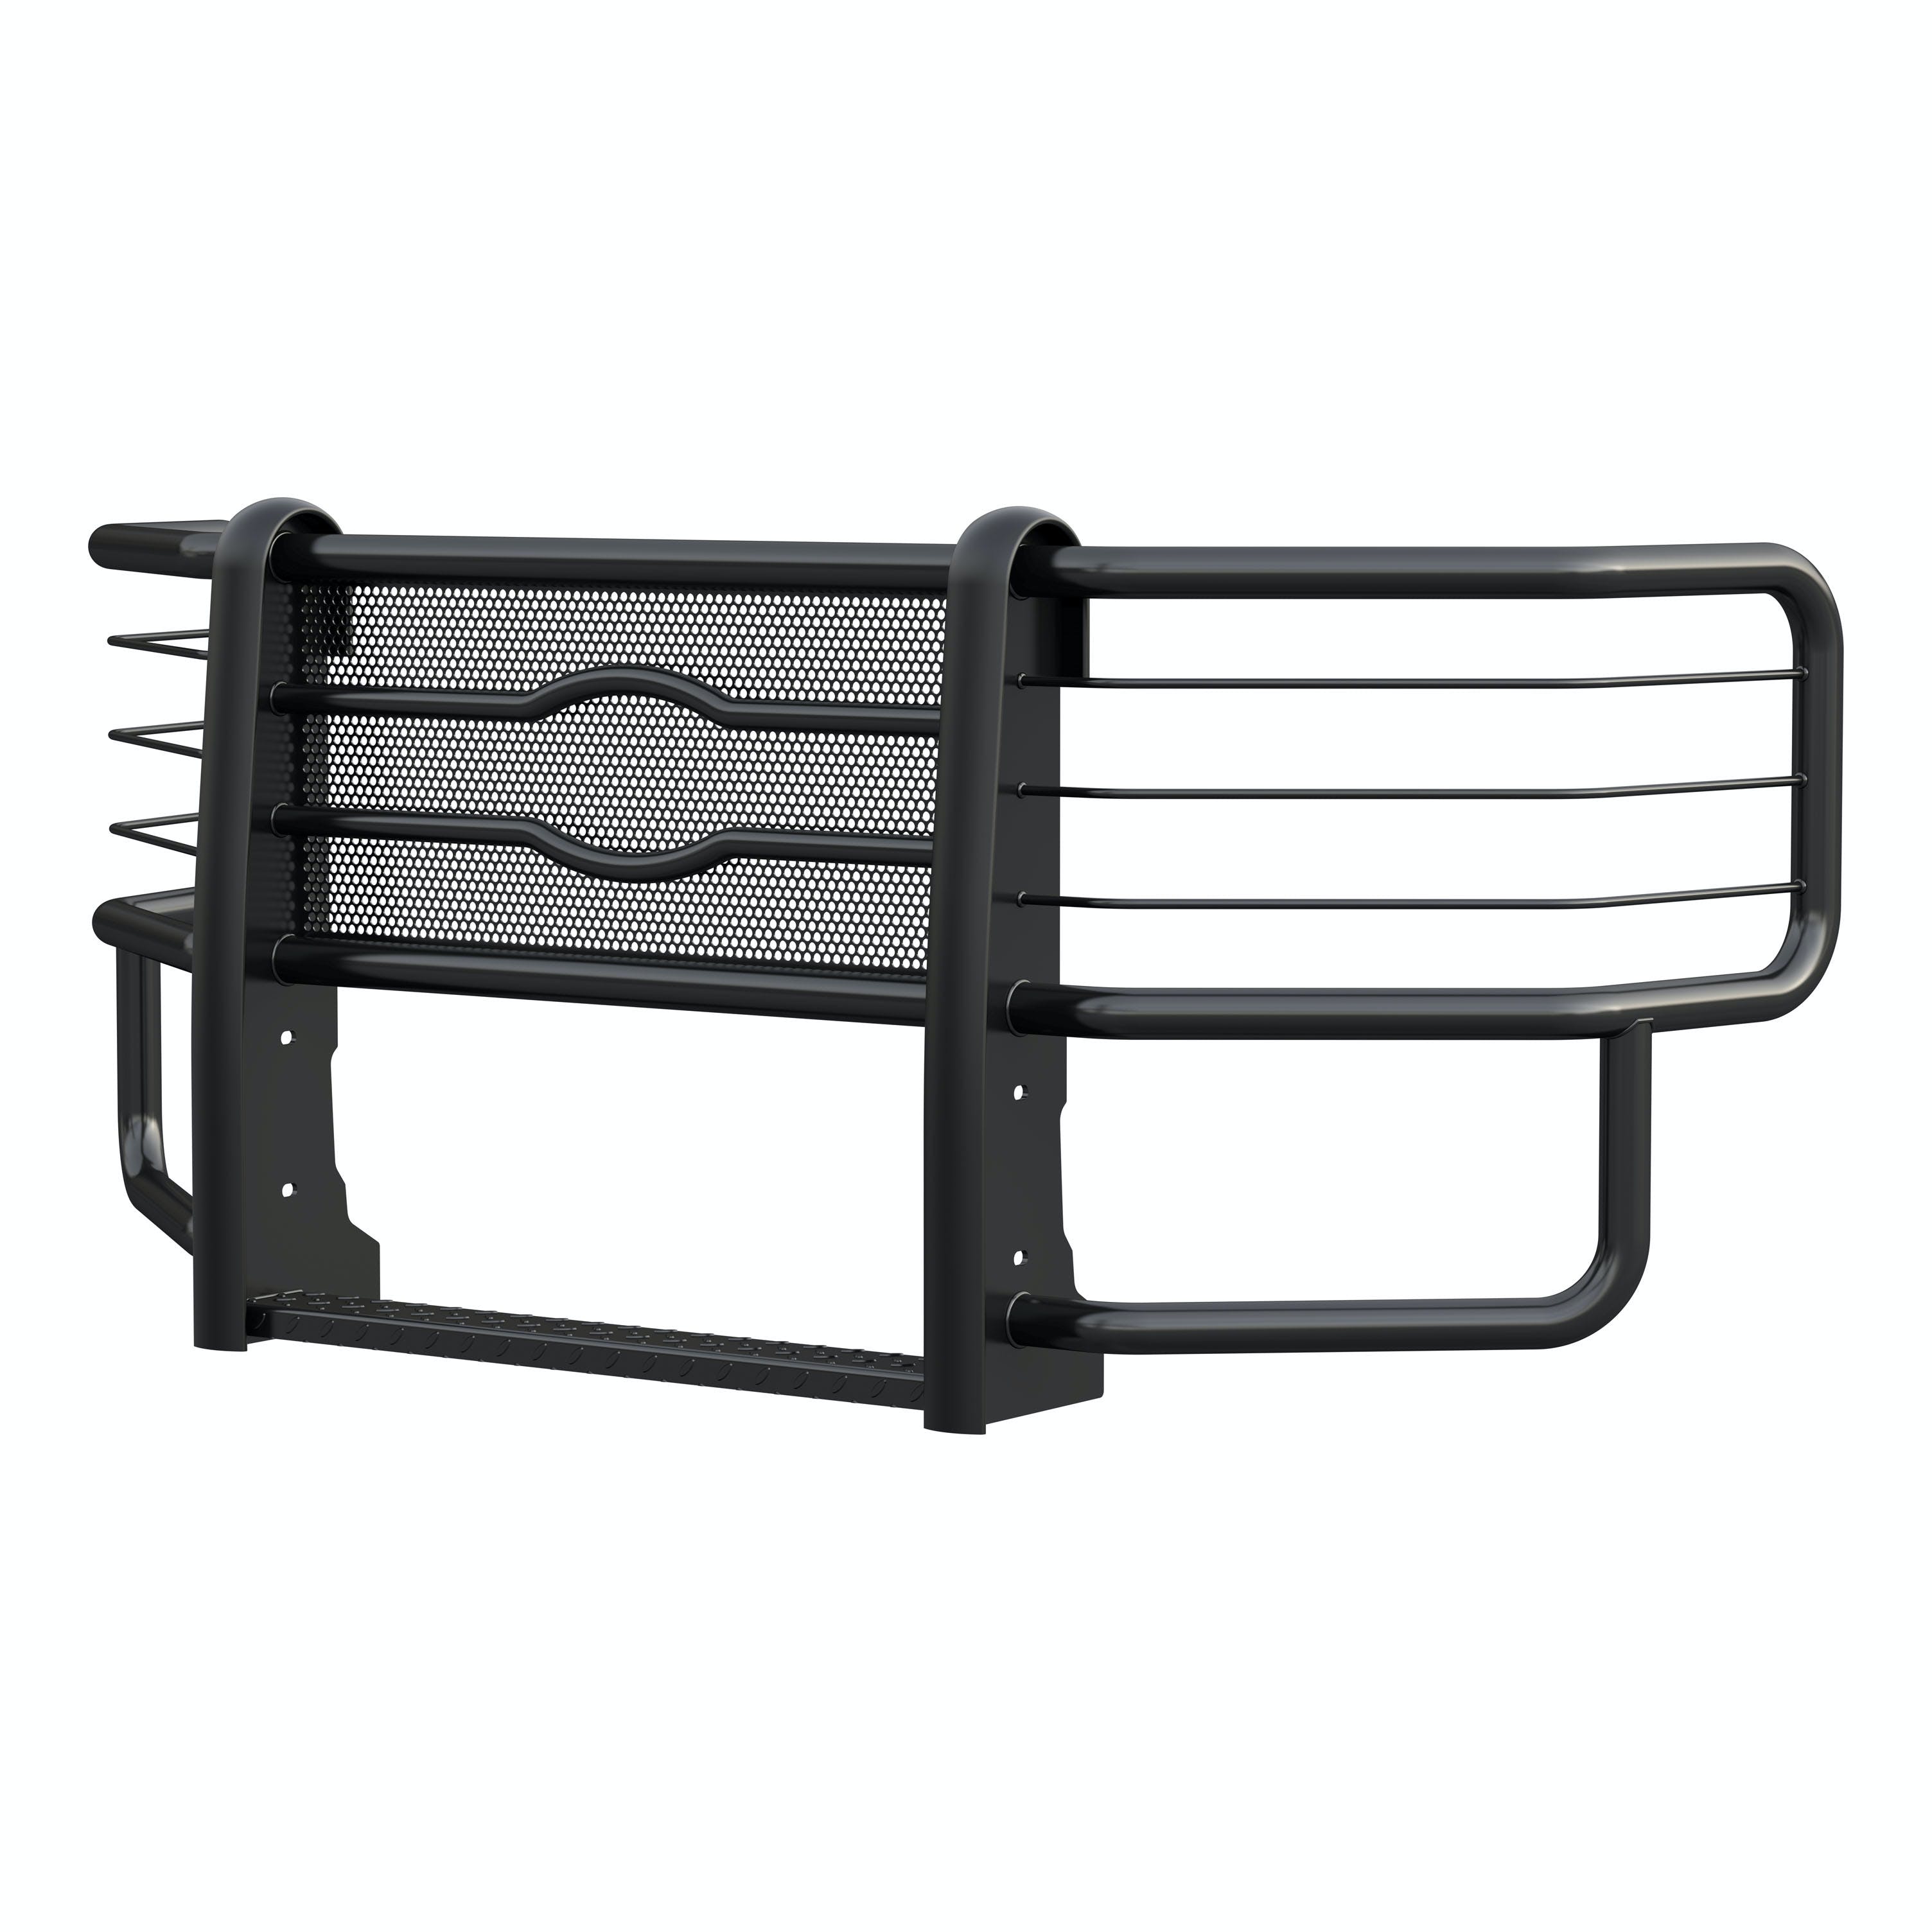 LUVERNE 321523 Prowler Max Grille Guard